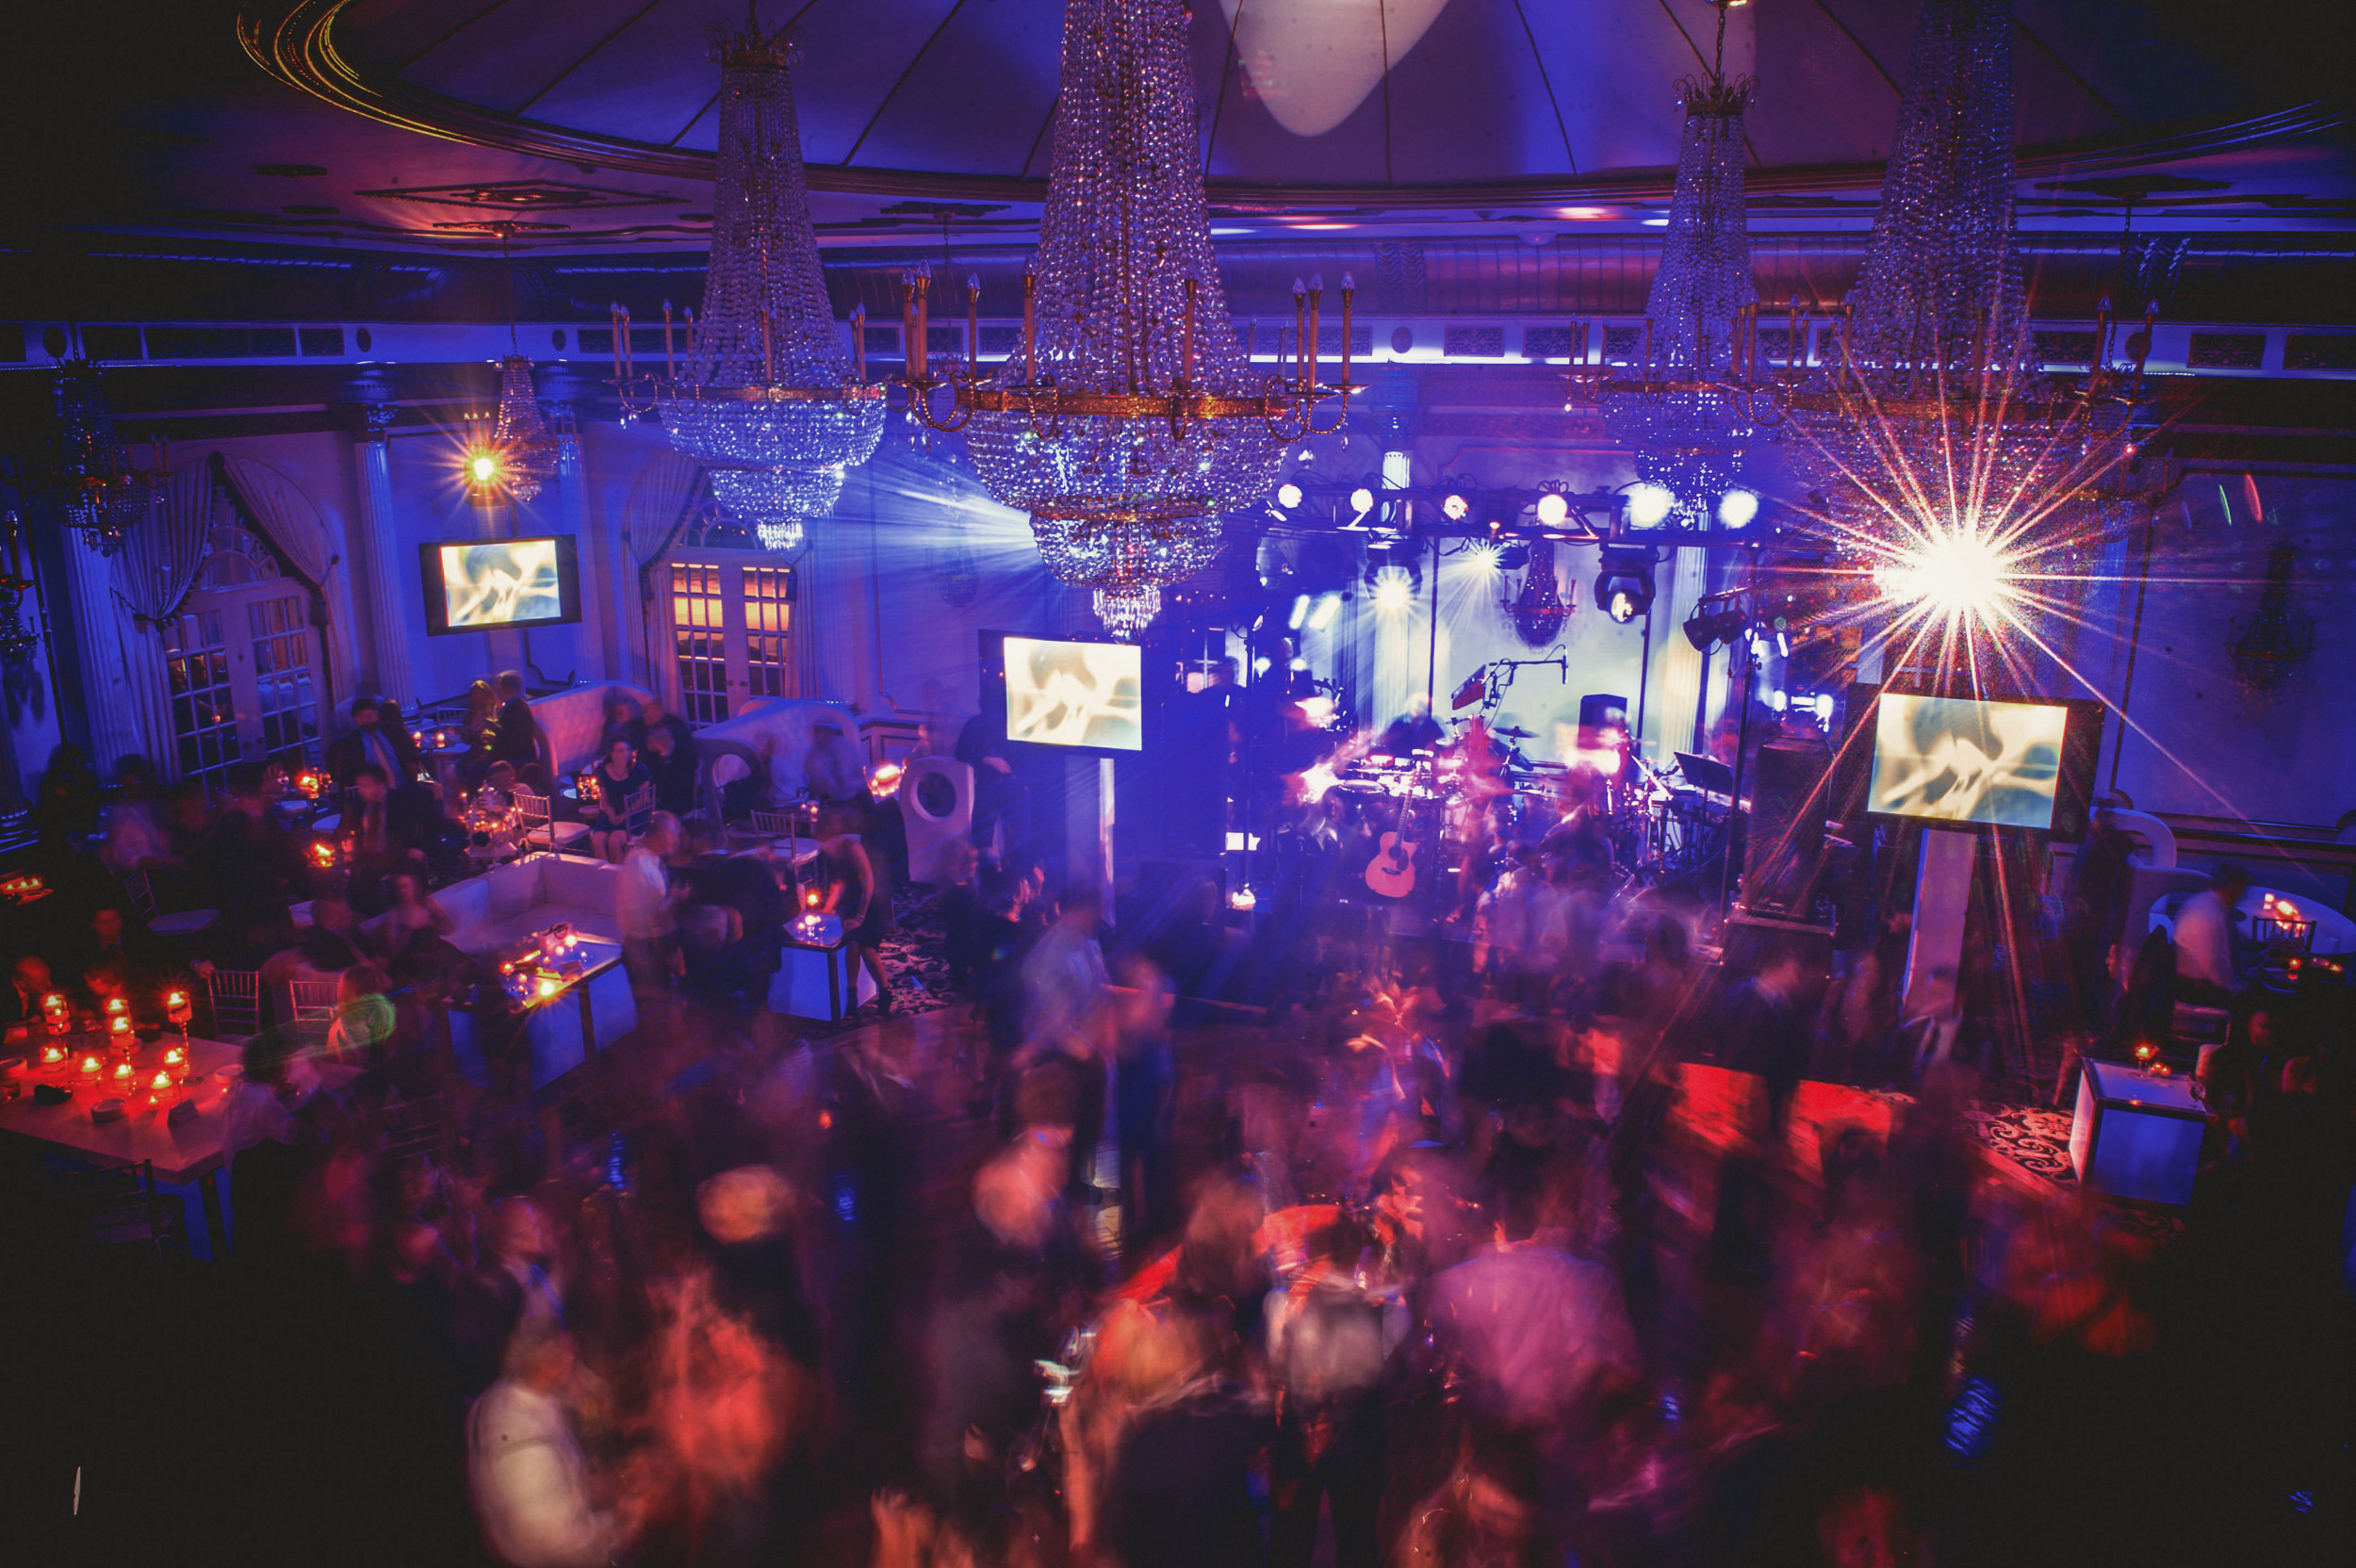 Crystal Plaza wedding venue with bluish haze and chandeliers overhead; crowd dancing with motion blur, band performing on stage lit by vibrant lights.